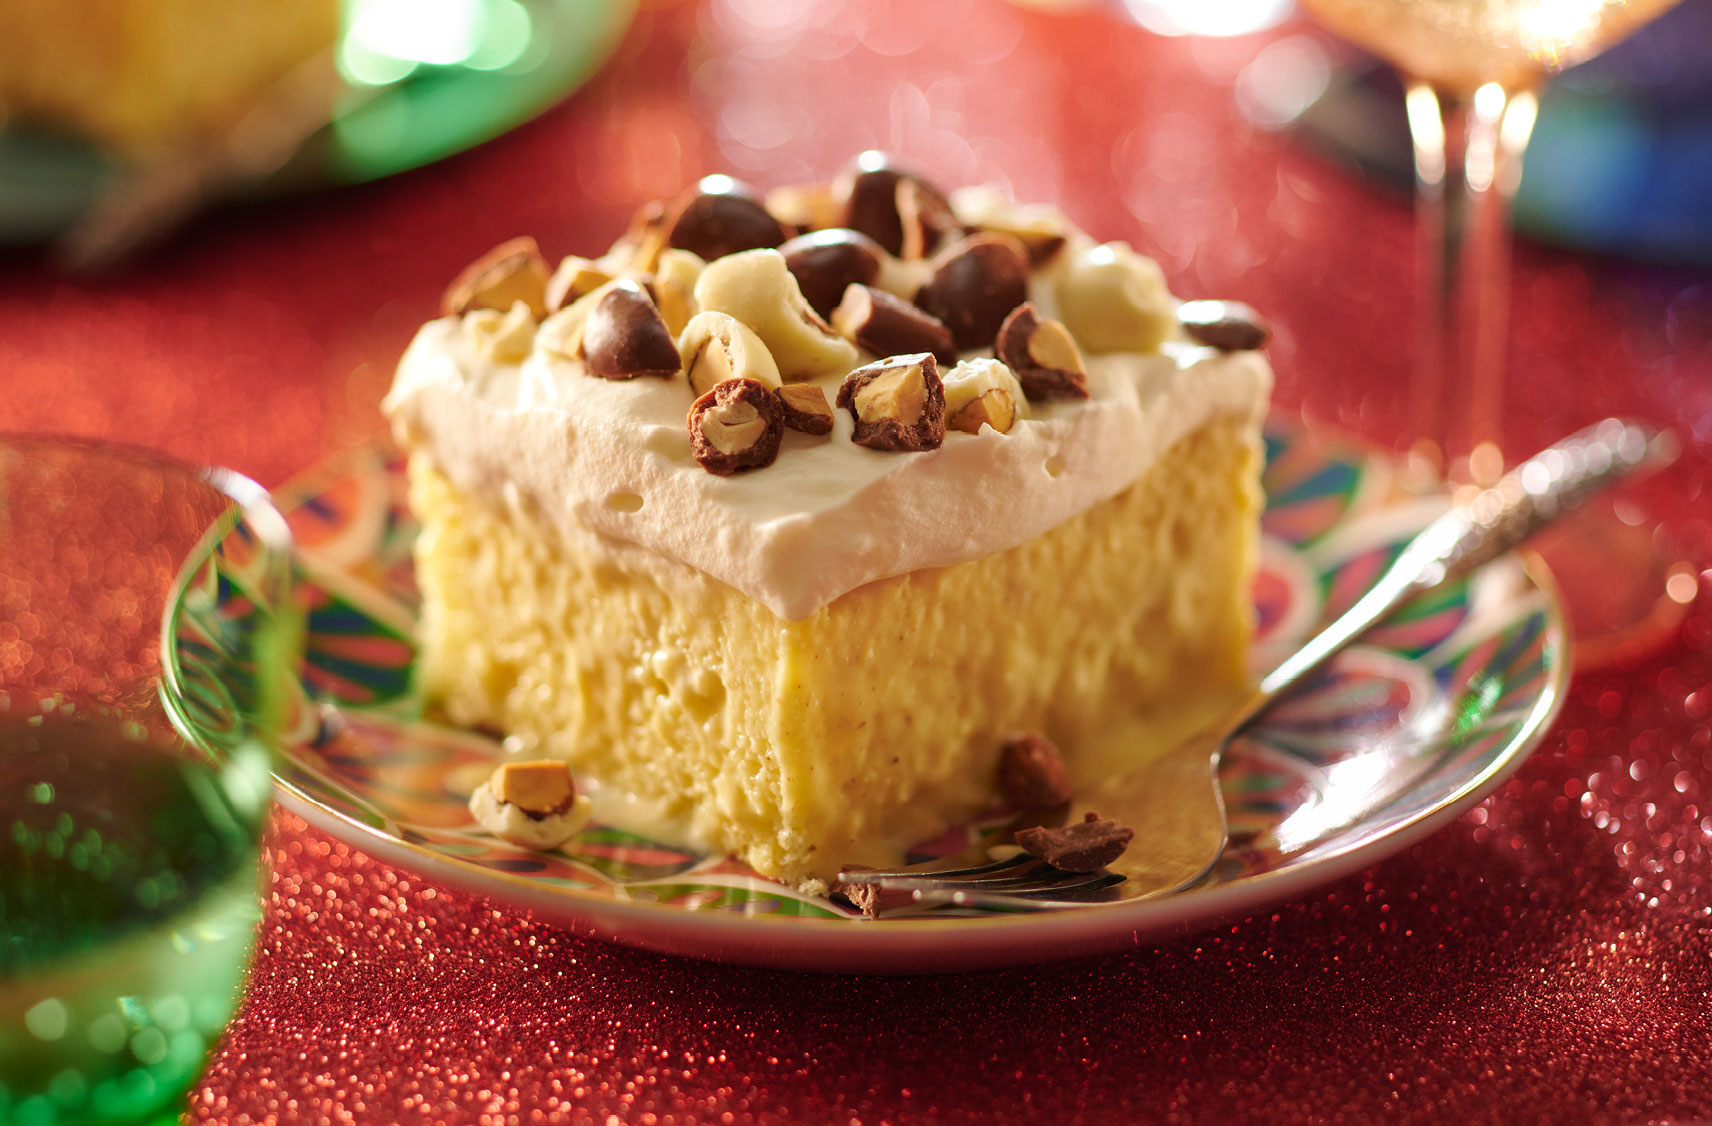 A slice of cake with whipped icing and topped with pieces of chocolate-covered almonds on a festive plate.